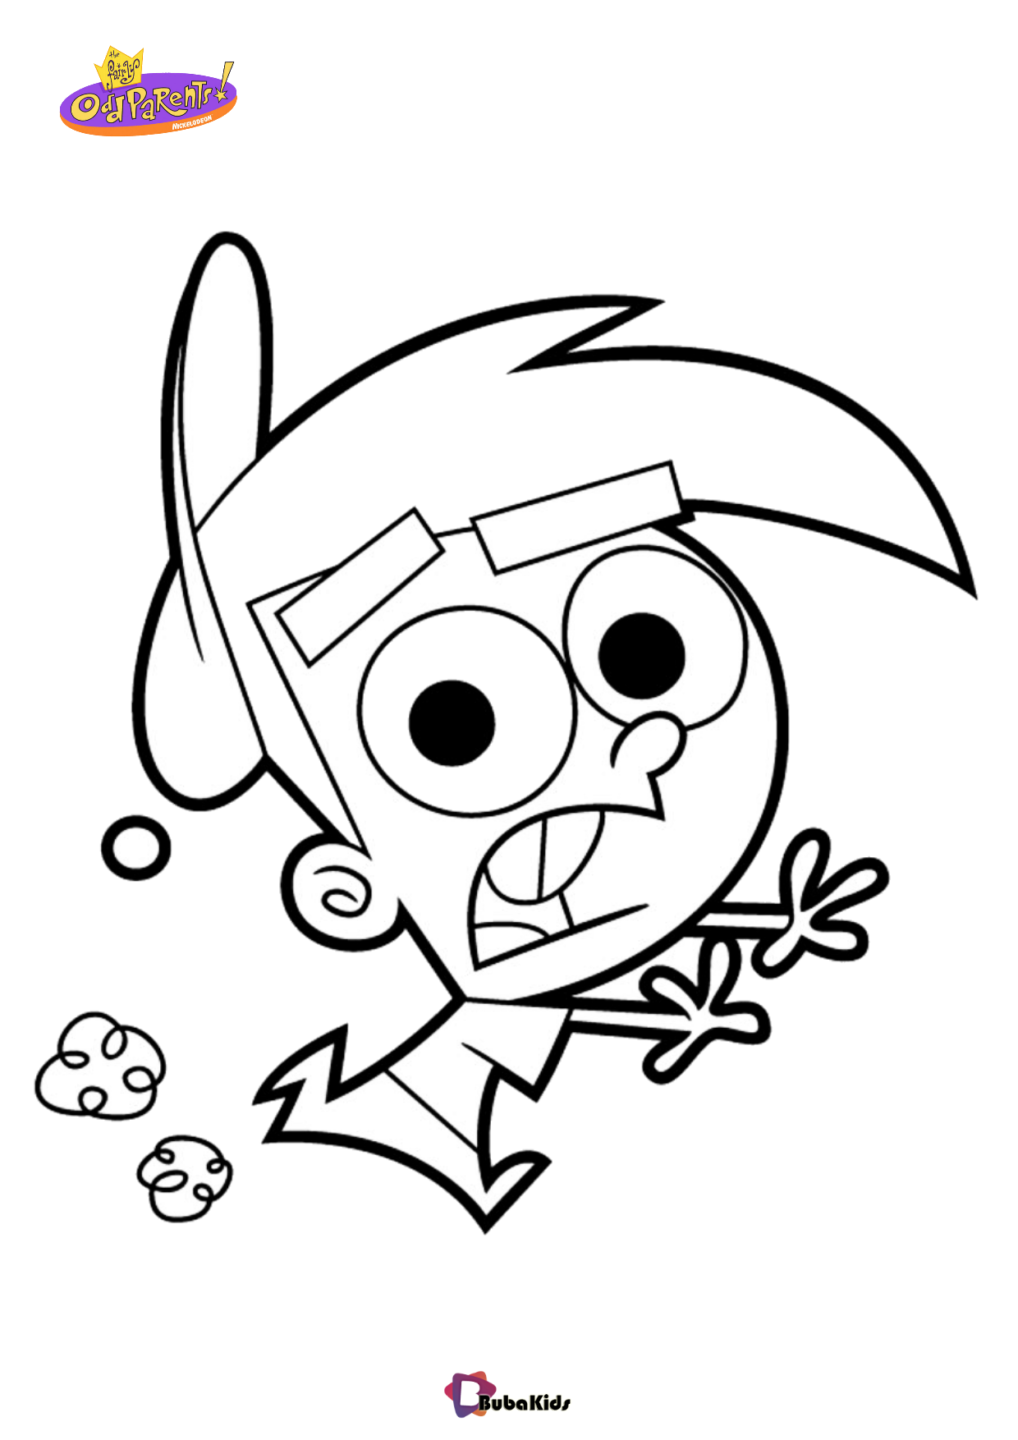 Fairly Oddparents Nickelodeon children tv series coloring page